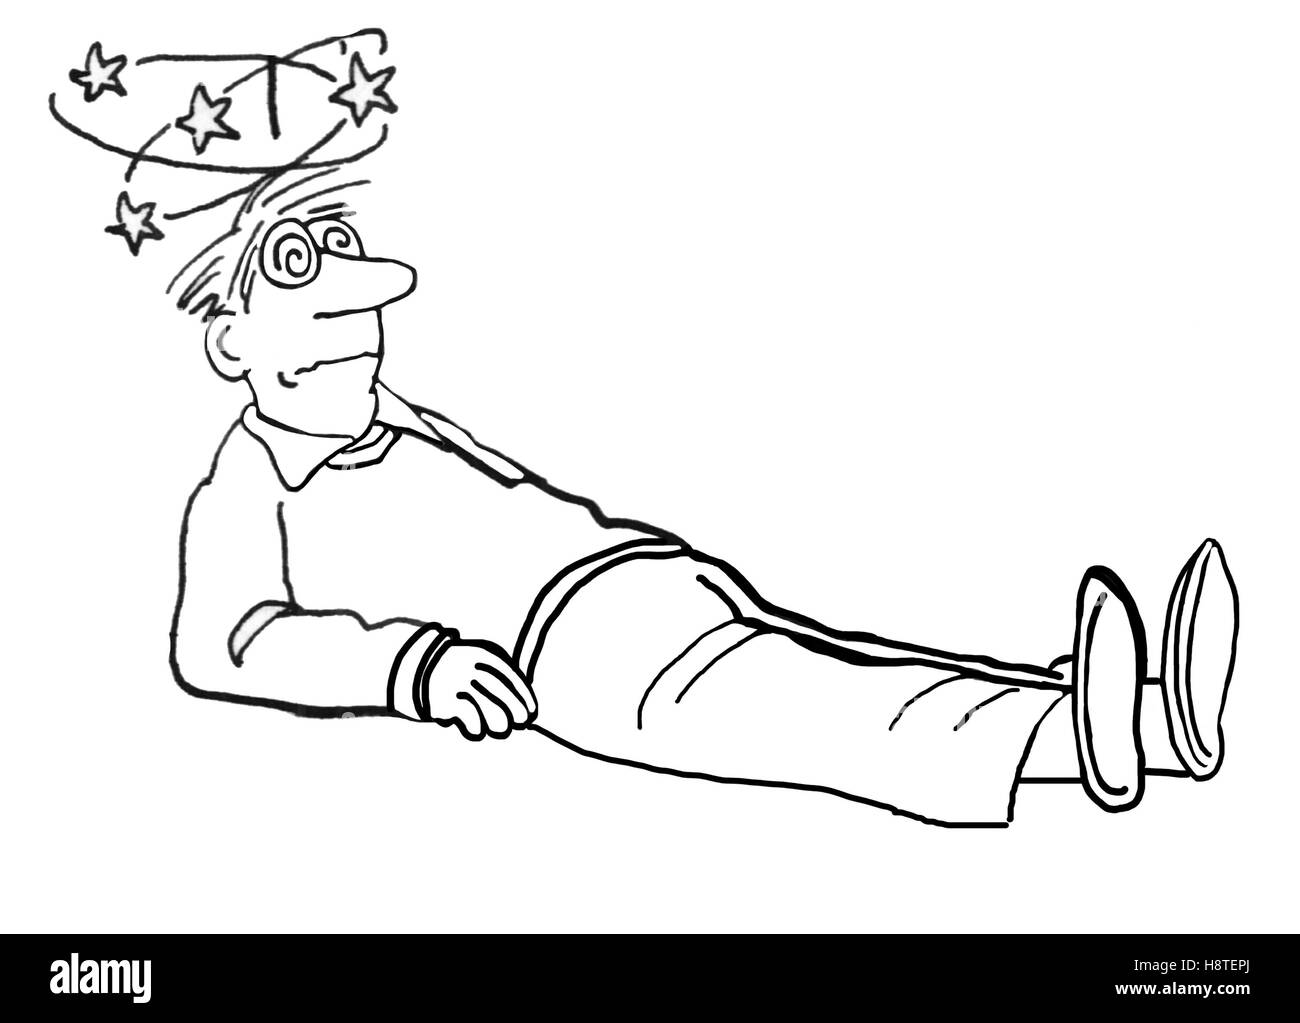 Black and white illustration of a man who has fallen and is feeling dizzy. Stock Photo